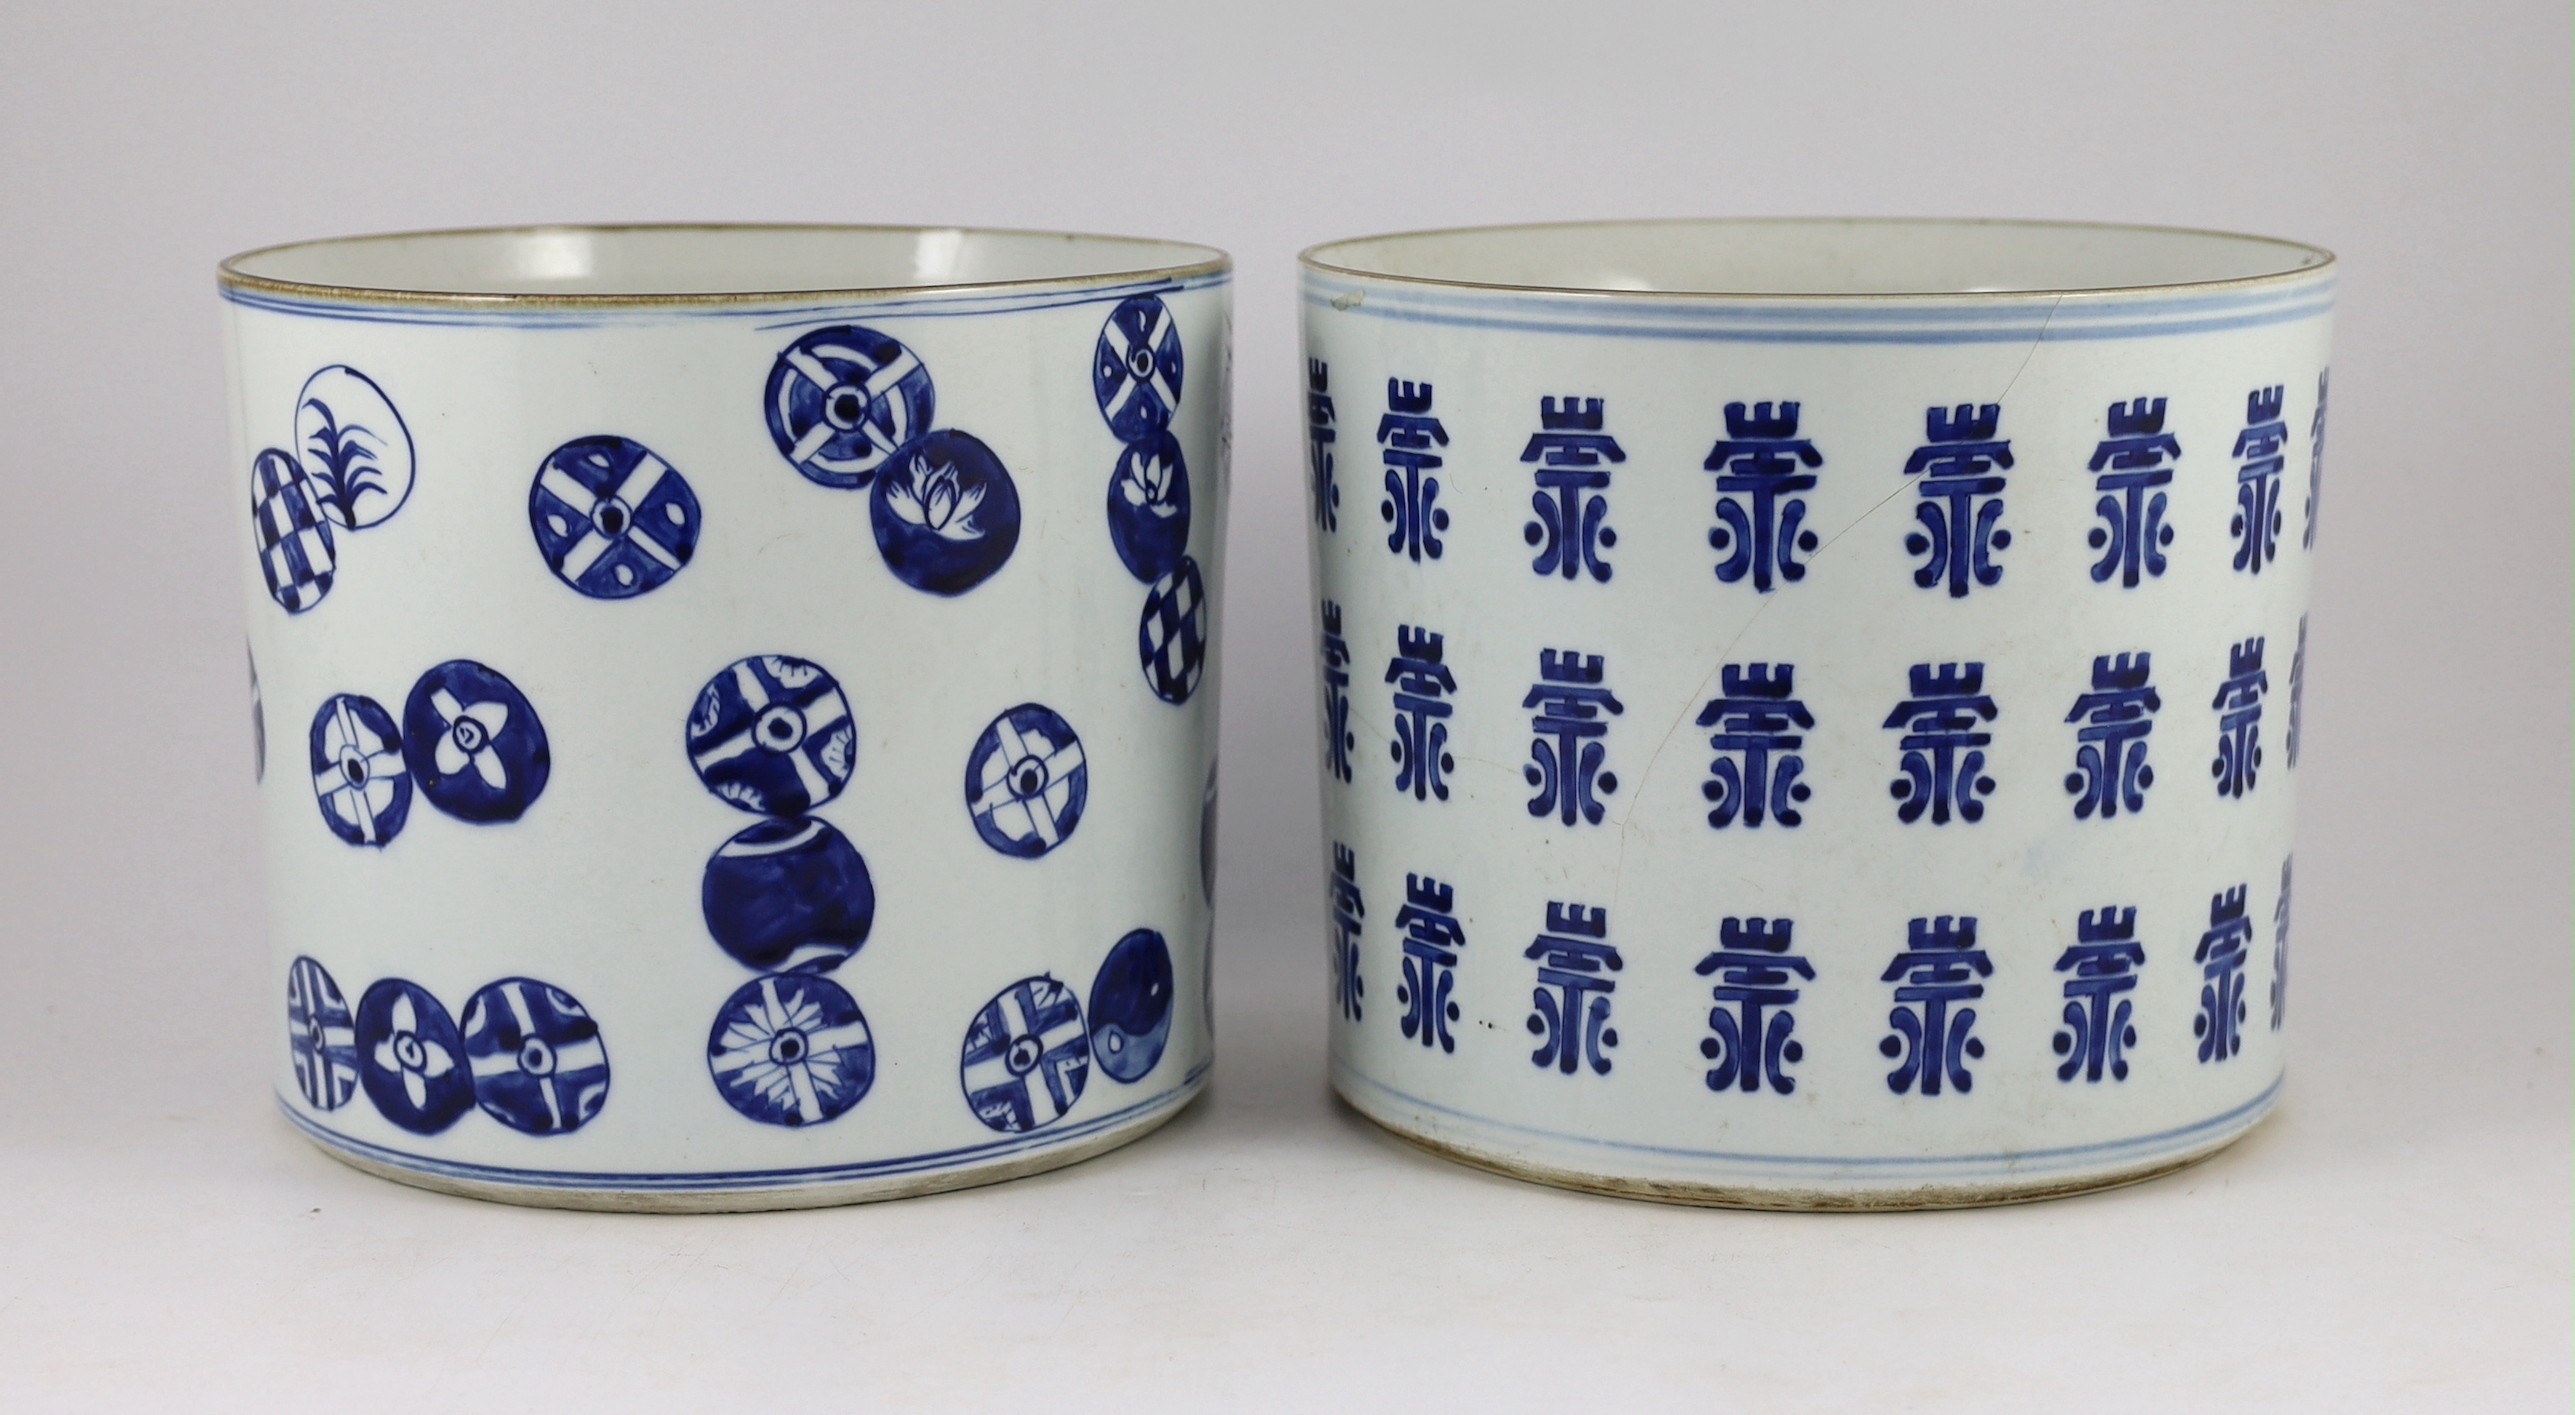 A pair of large Chinese blue and white brushpots, late 19th century 25 cm diameter, one cracked